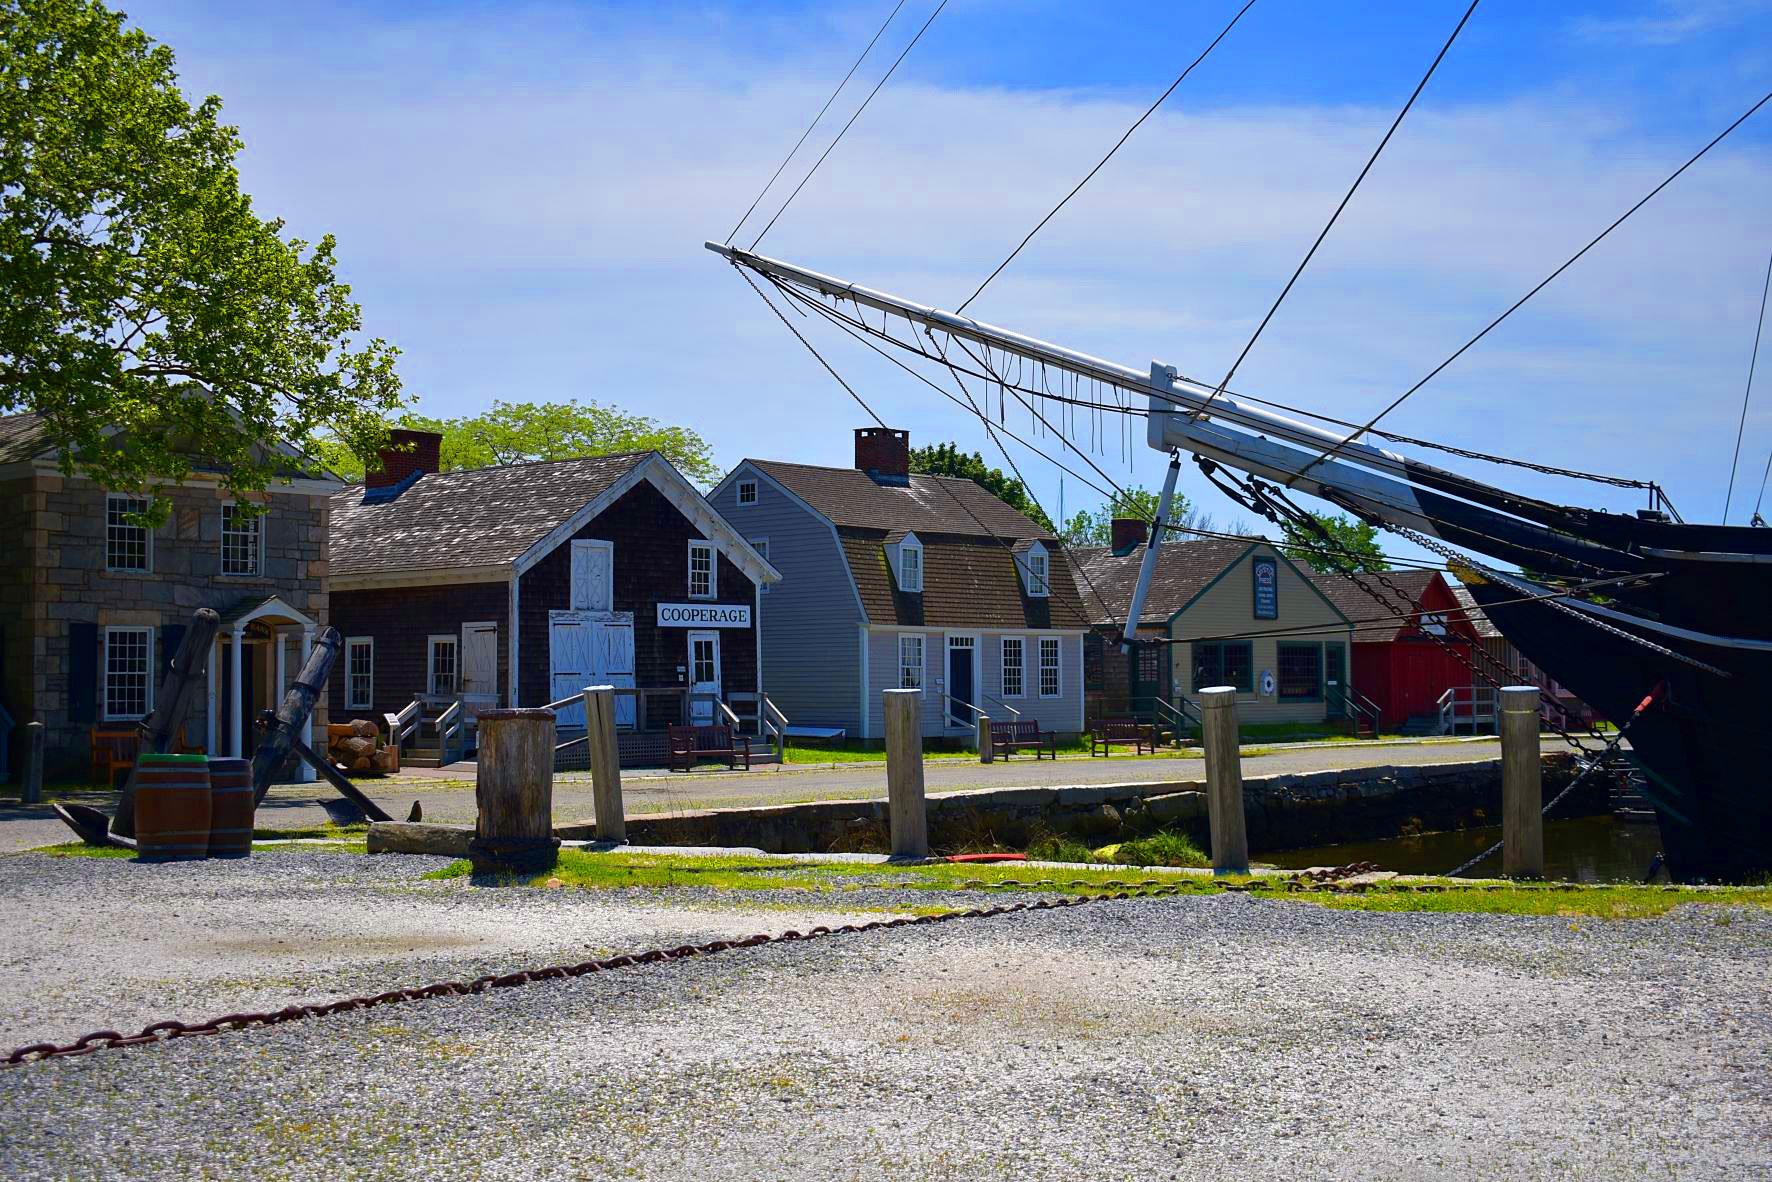 All About Mystic Seaport Museum